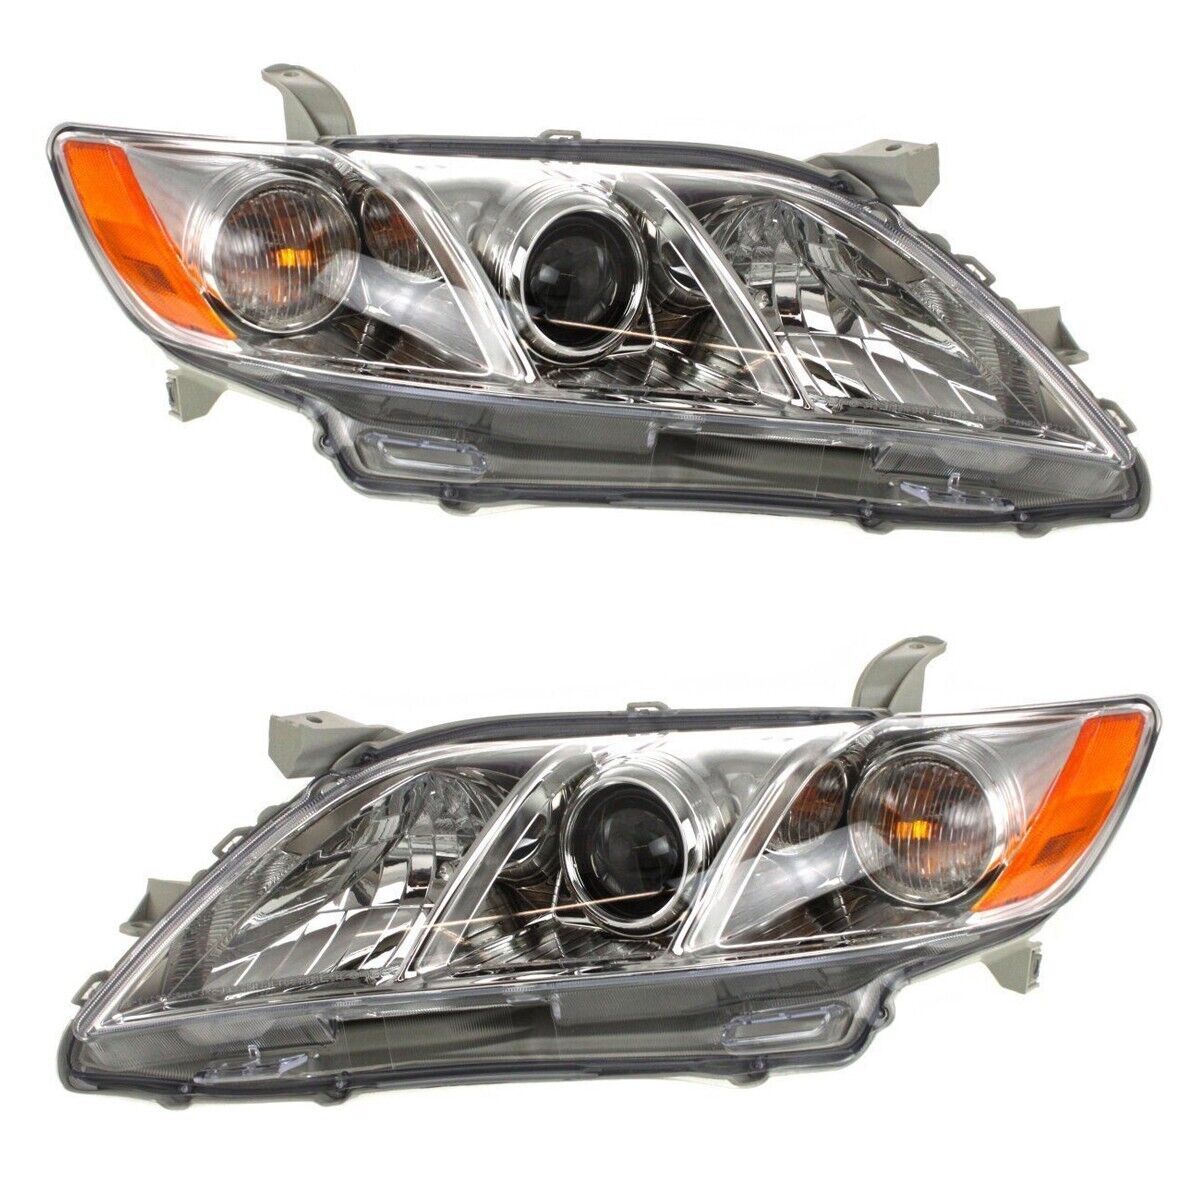 DEPO Headlight Set For 2007-2009 Toyota Camry Driver & Passenger Side TO2502197